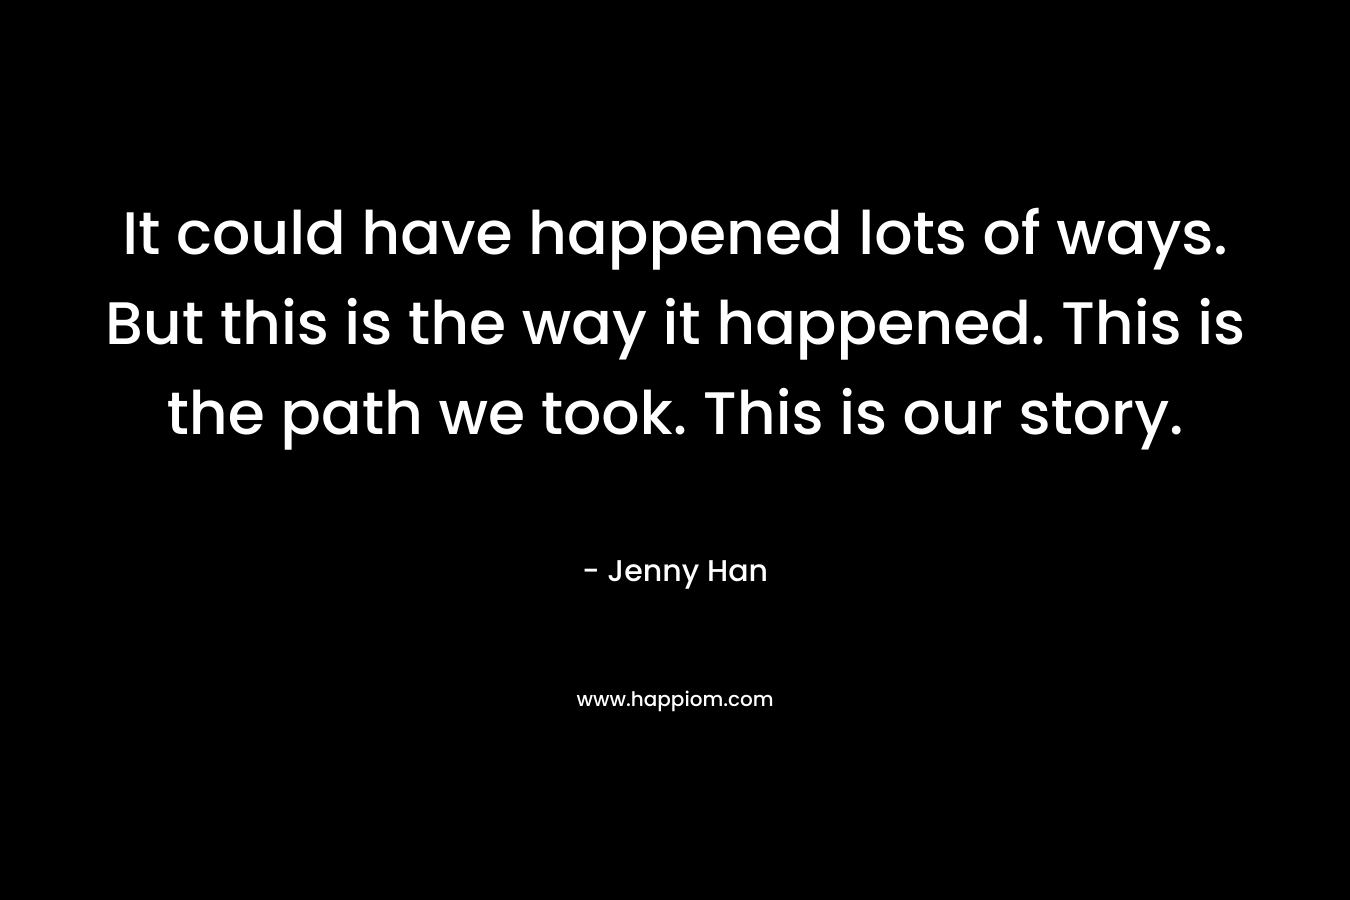 It could have happened lots of ways. But this is the way it happened. This is the path we took. This is our story.